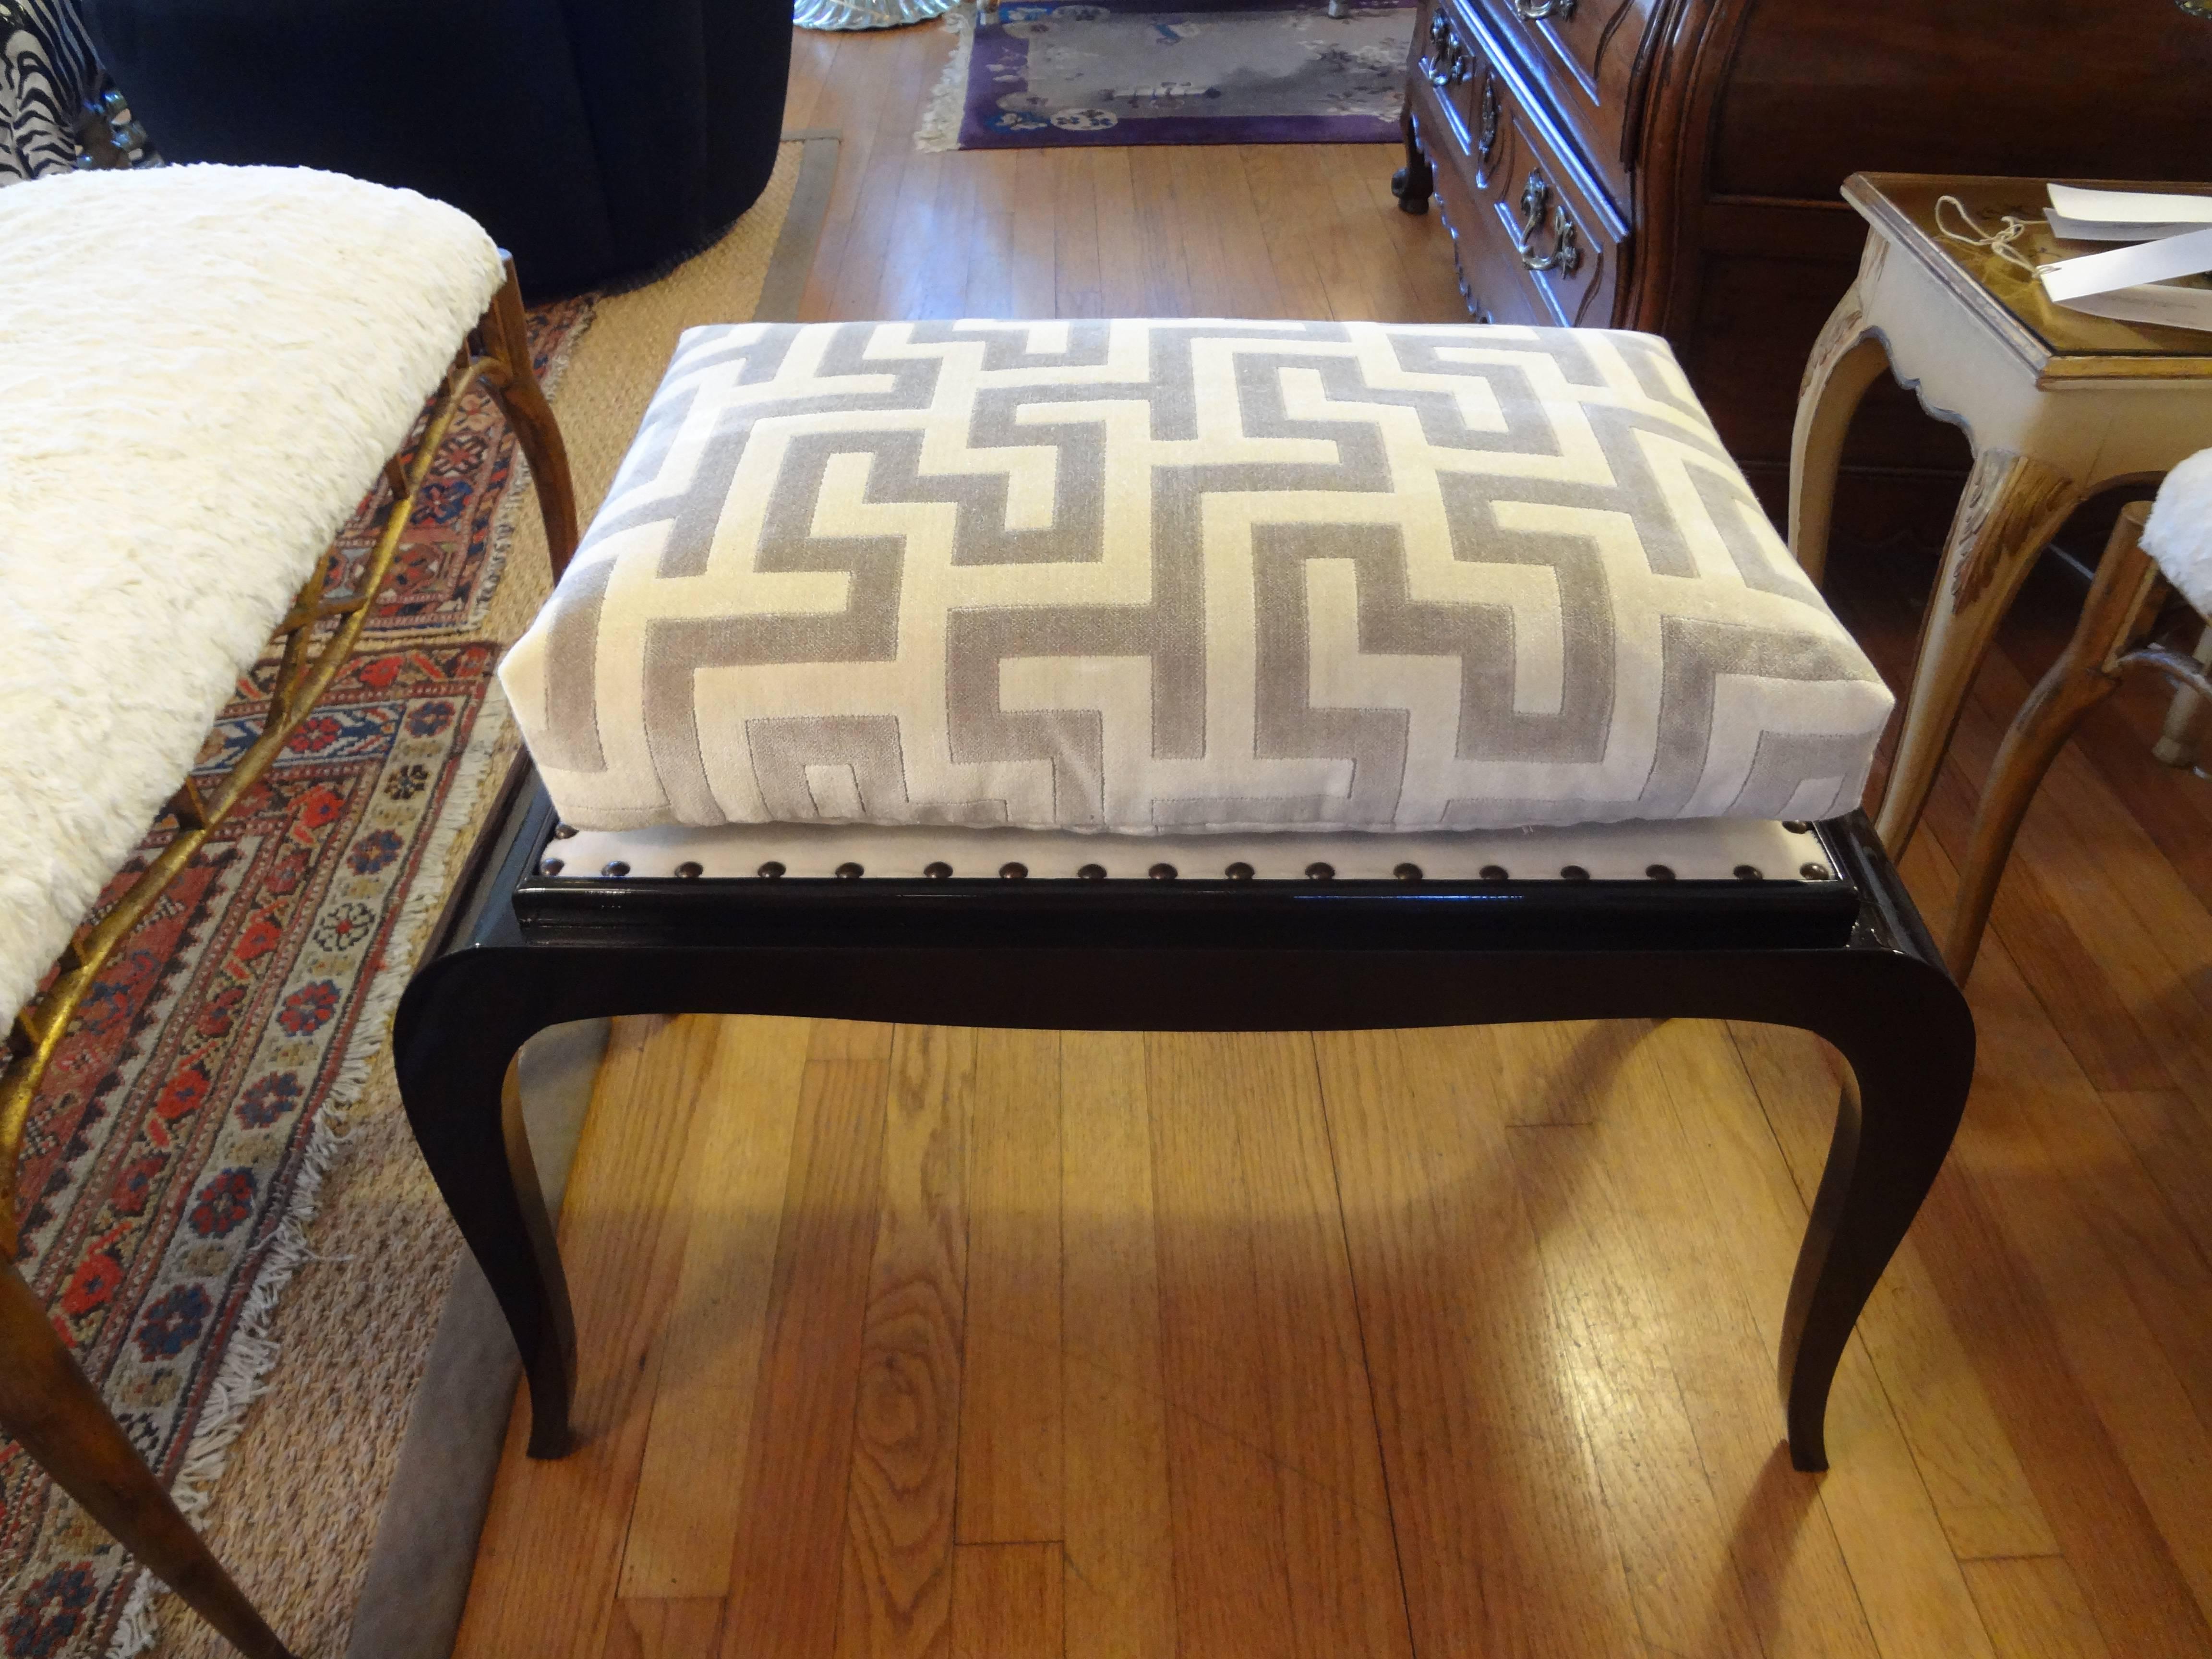 Period French Art Deco bench, stool or ottoman with black lacquered finish professionally upholstered in Greek key cut velvet fabric, circa 1930. This French Art Deco Ruhlmann inspired bench would work well in a black and white interior.